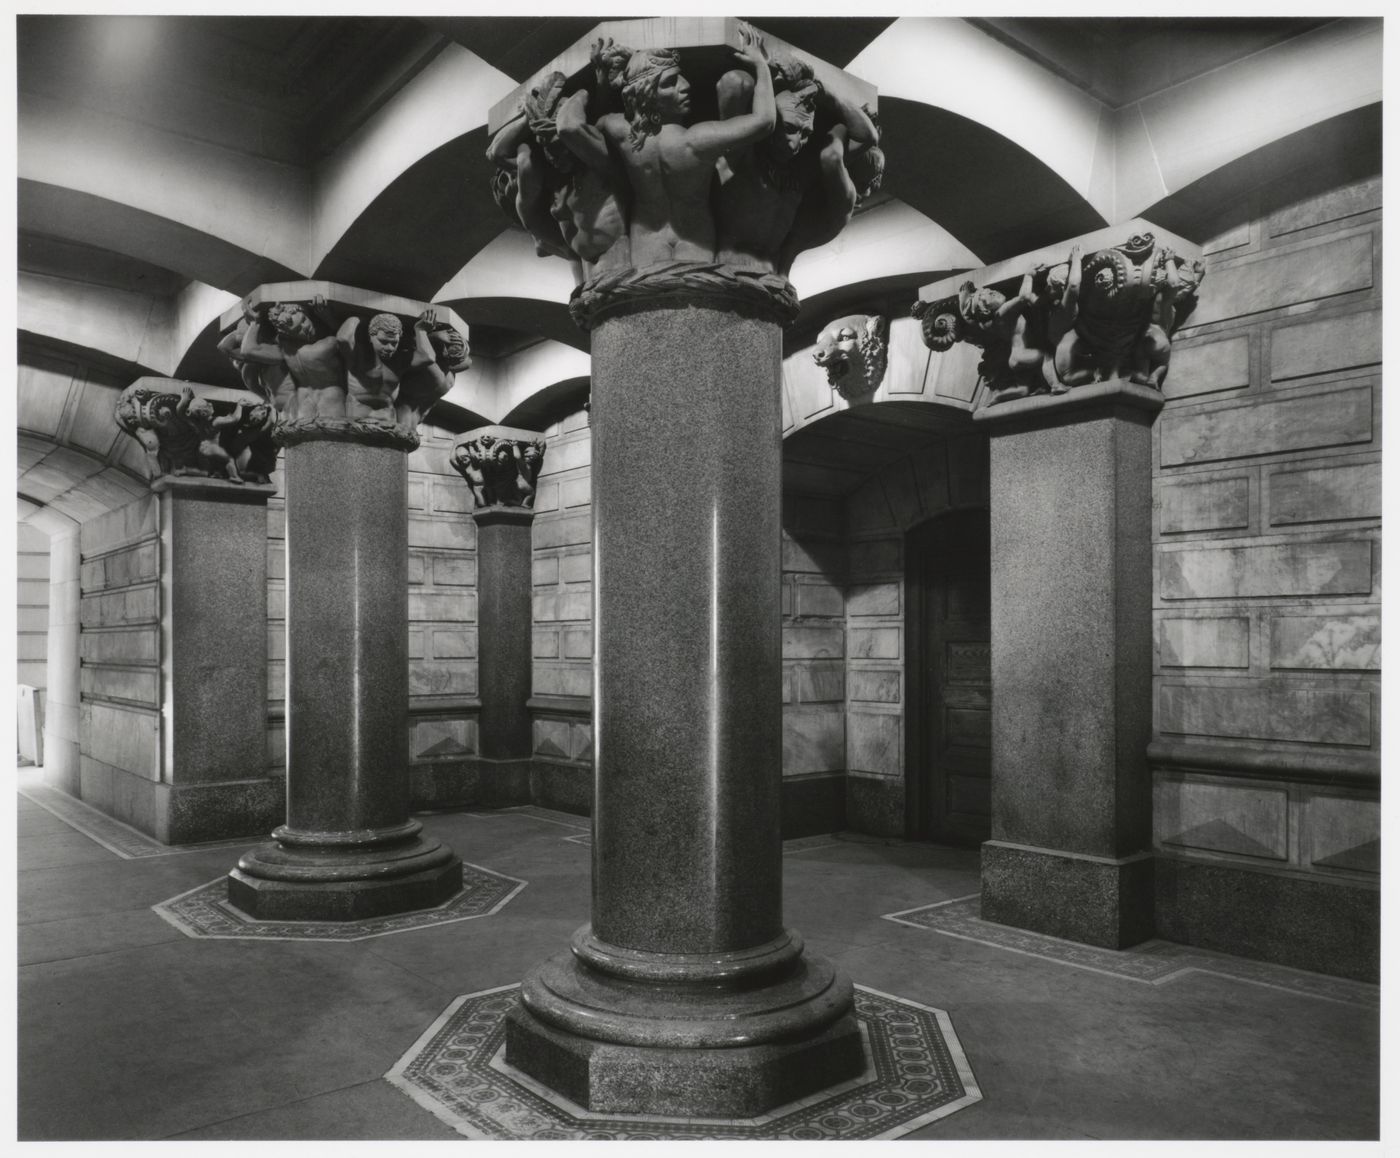 Concourse with sculptured capitals by Alexander Calder, Philadelphia City Hall, serving County functions, Philadelphia, Pennyslvania